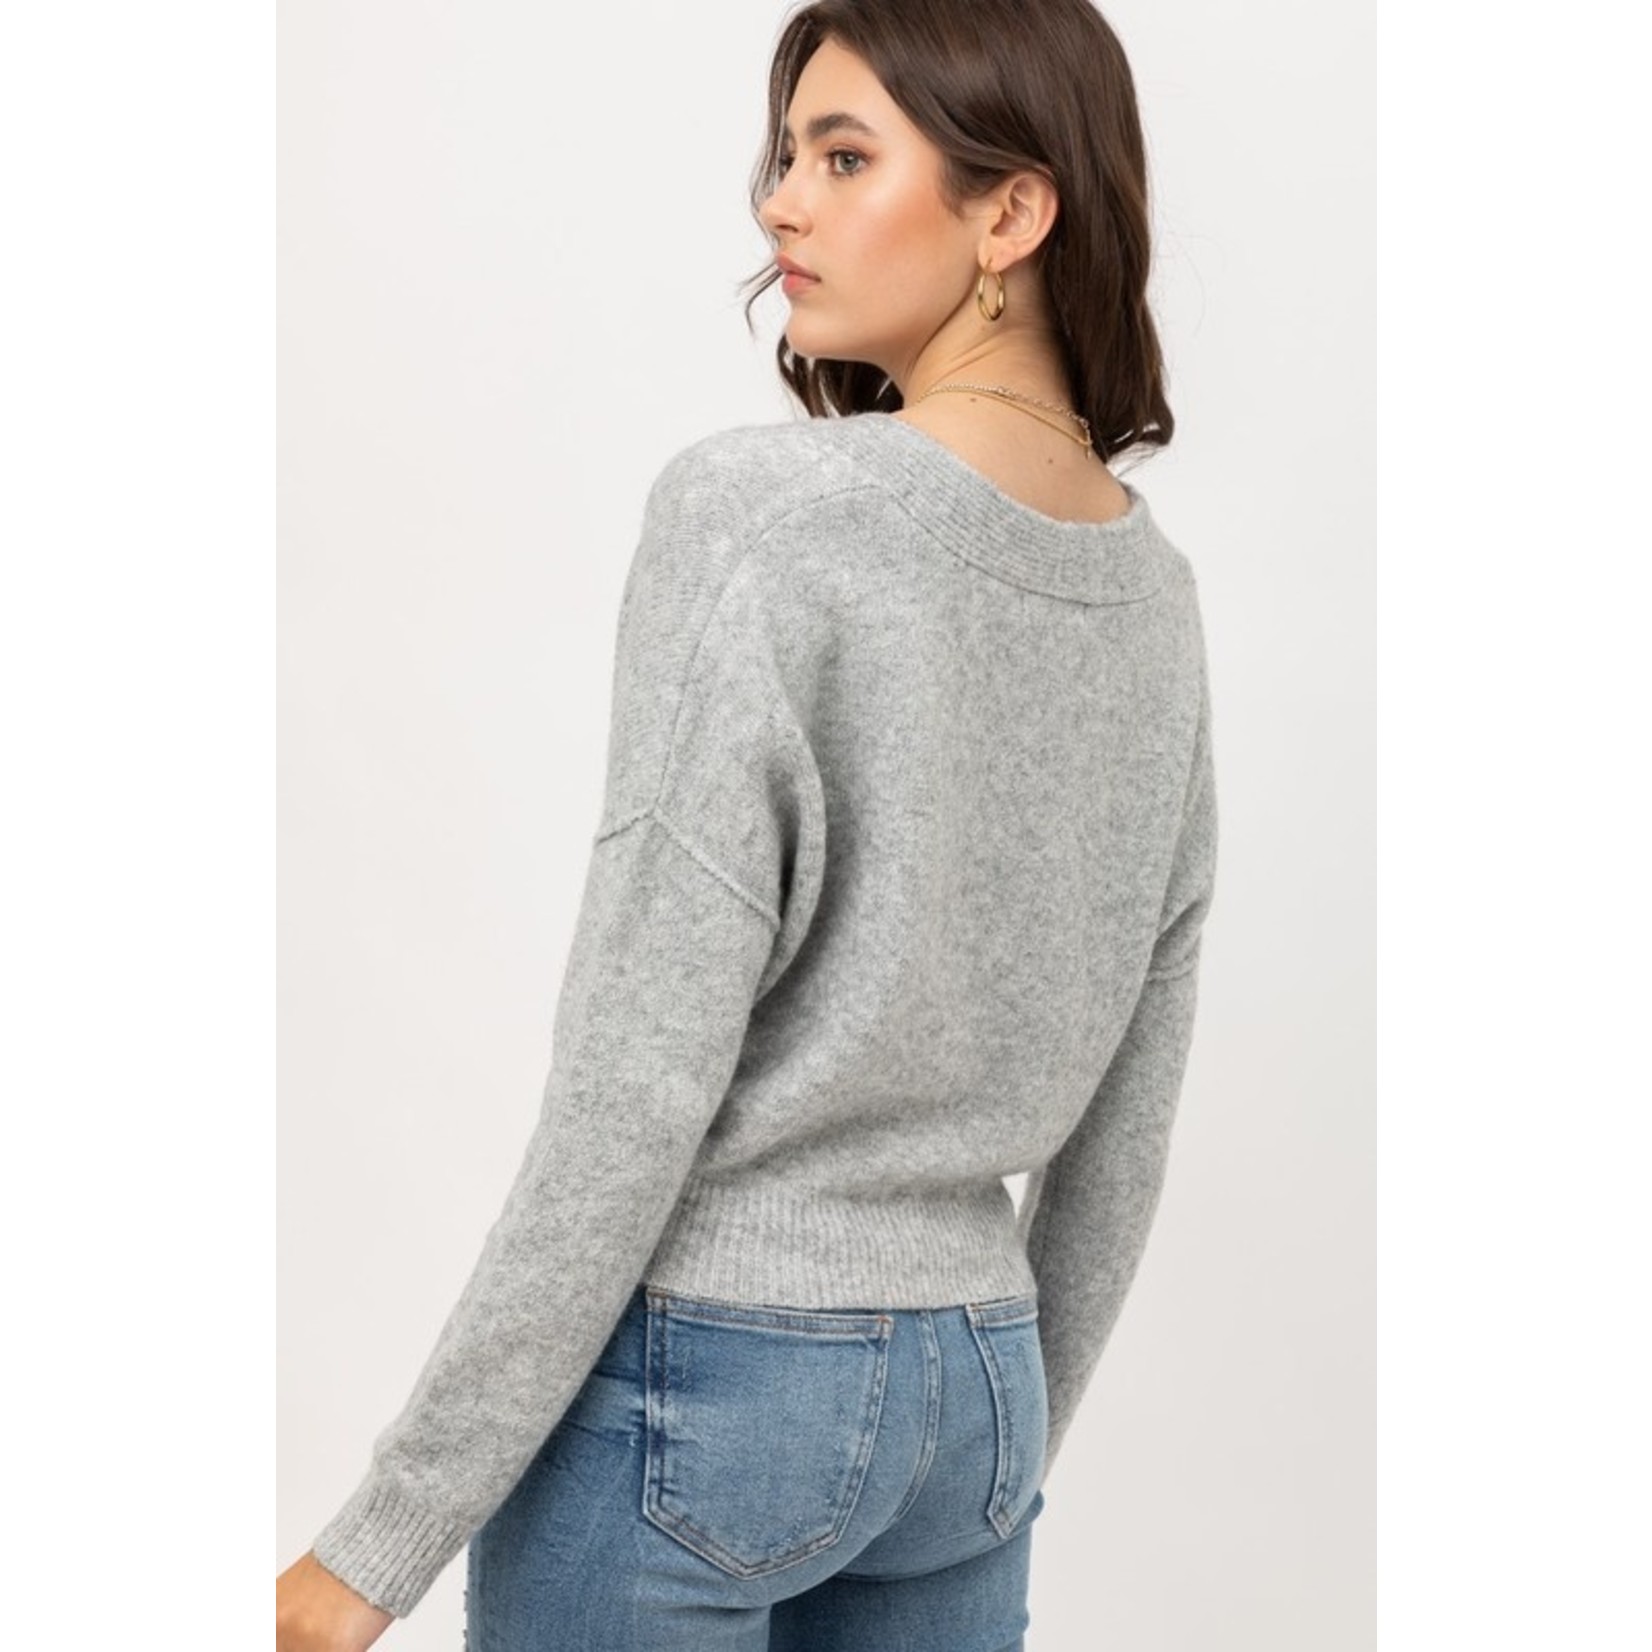 The Audrick Cropped Cardigan